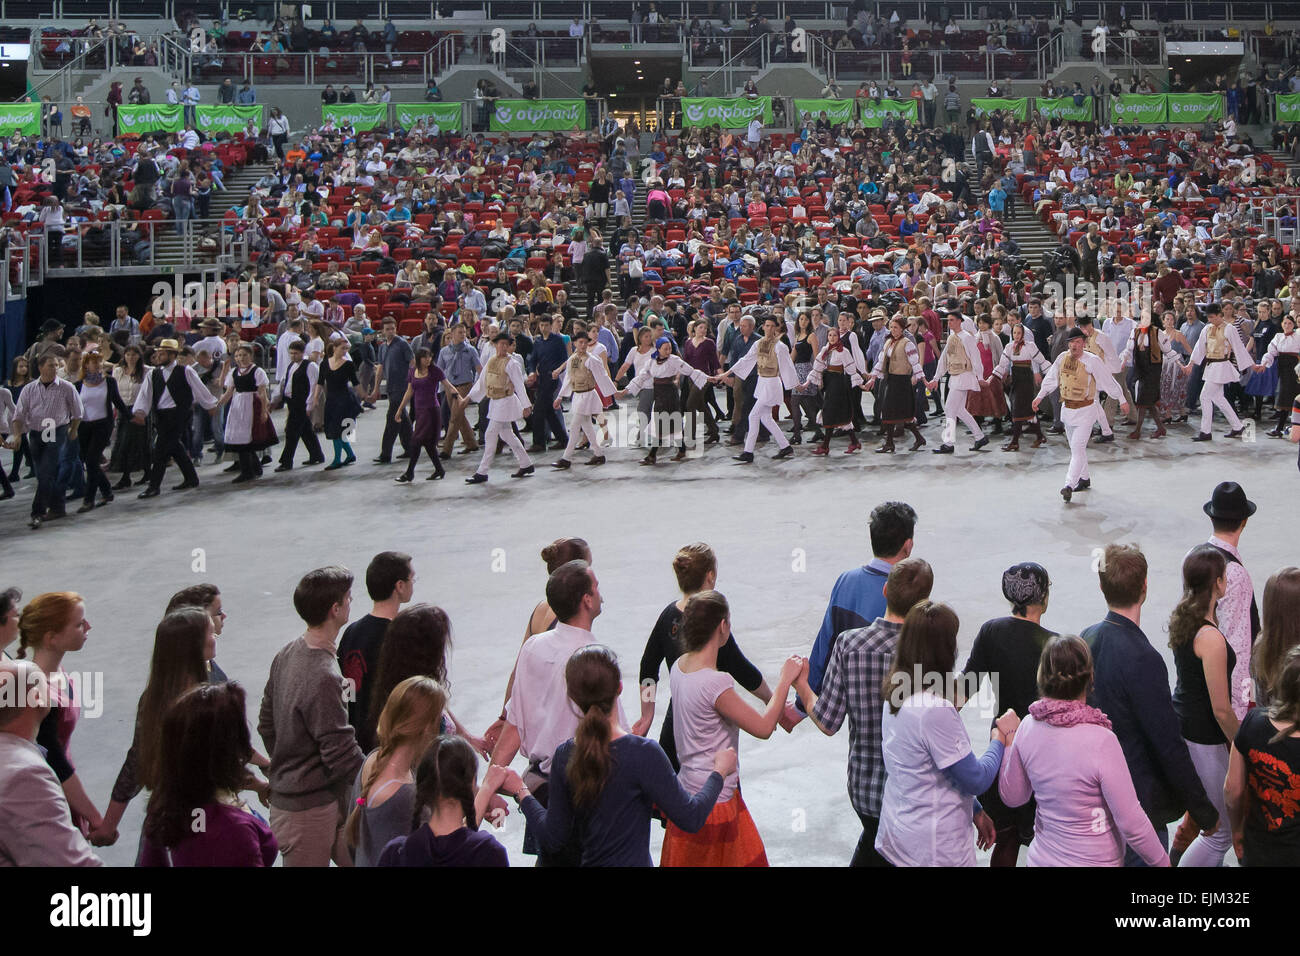 Budapest, Hungary. 28th Mar, 2015. People dance during the National Folk Dance Gathering at the Papp Laszlo Sports Arena in Budapest, Hungary, on March 28, 2015. © Attila Volgyi/Xinhua/Alamy Live News Stock Photo